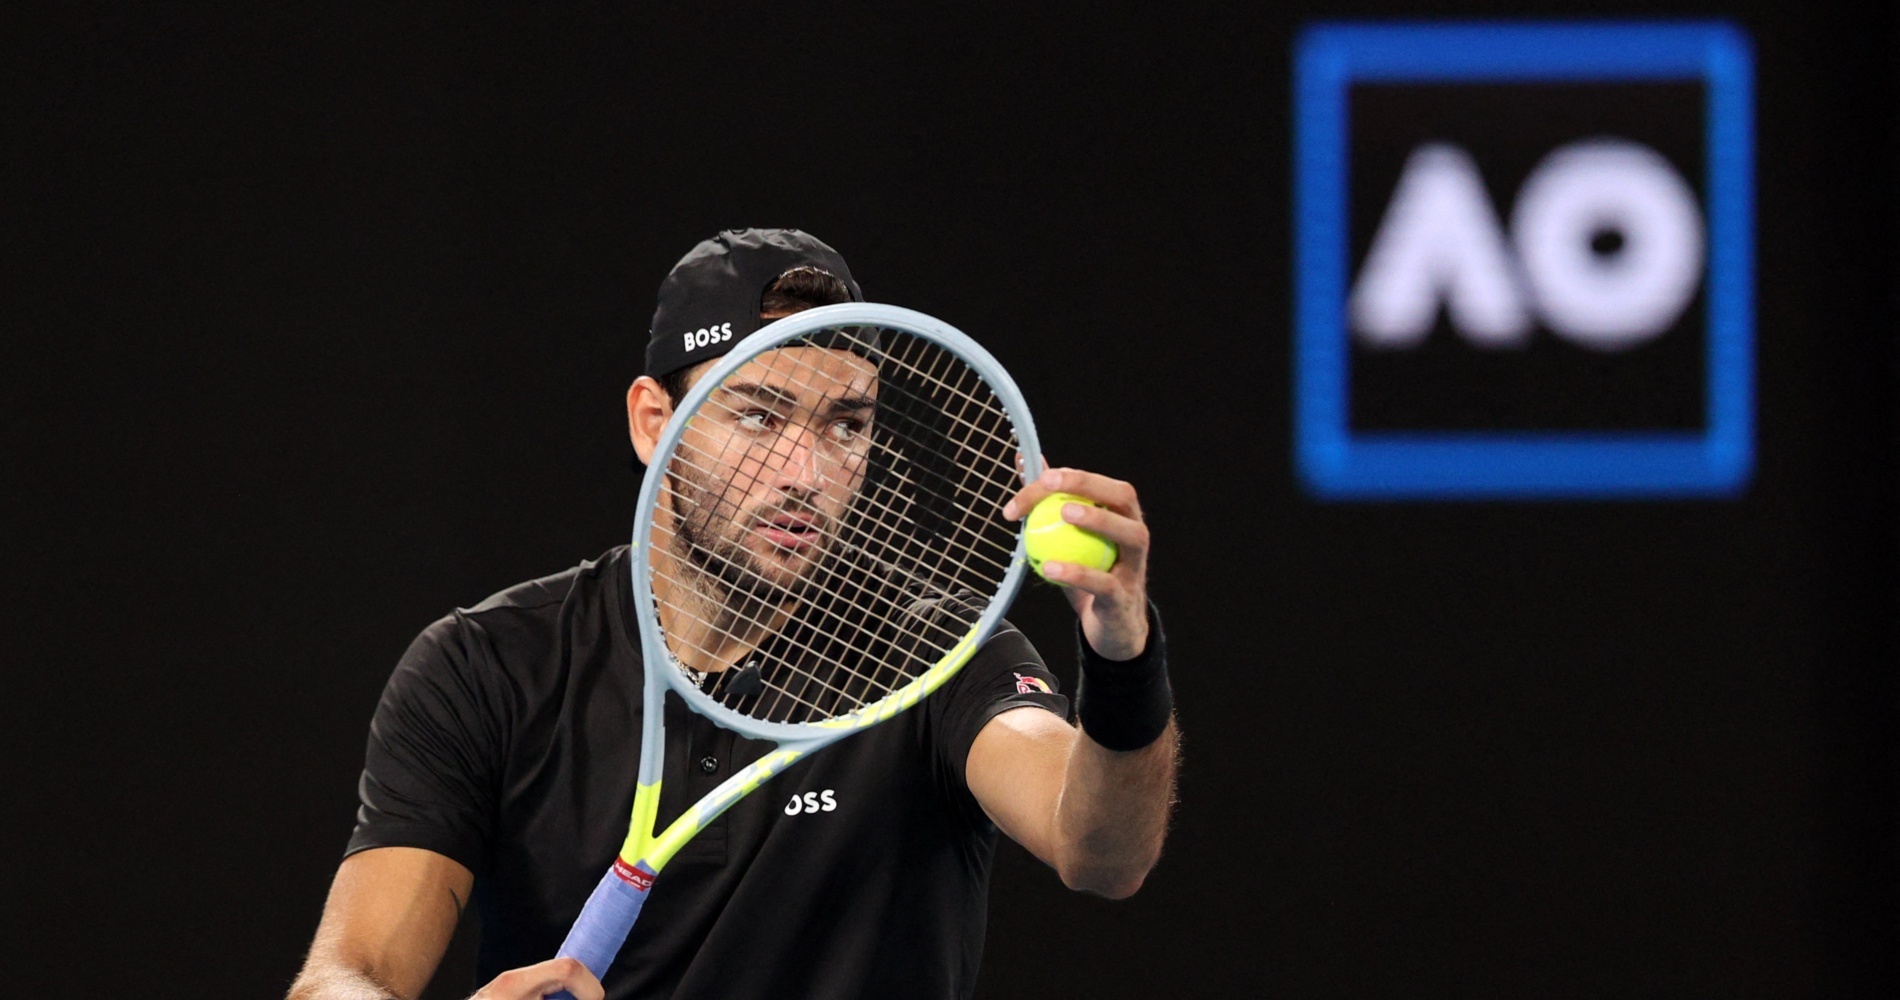 Playing Nadal at the Australian Open is something I dreamt about when I was a kid - Berrettini